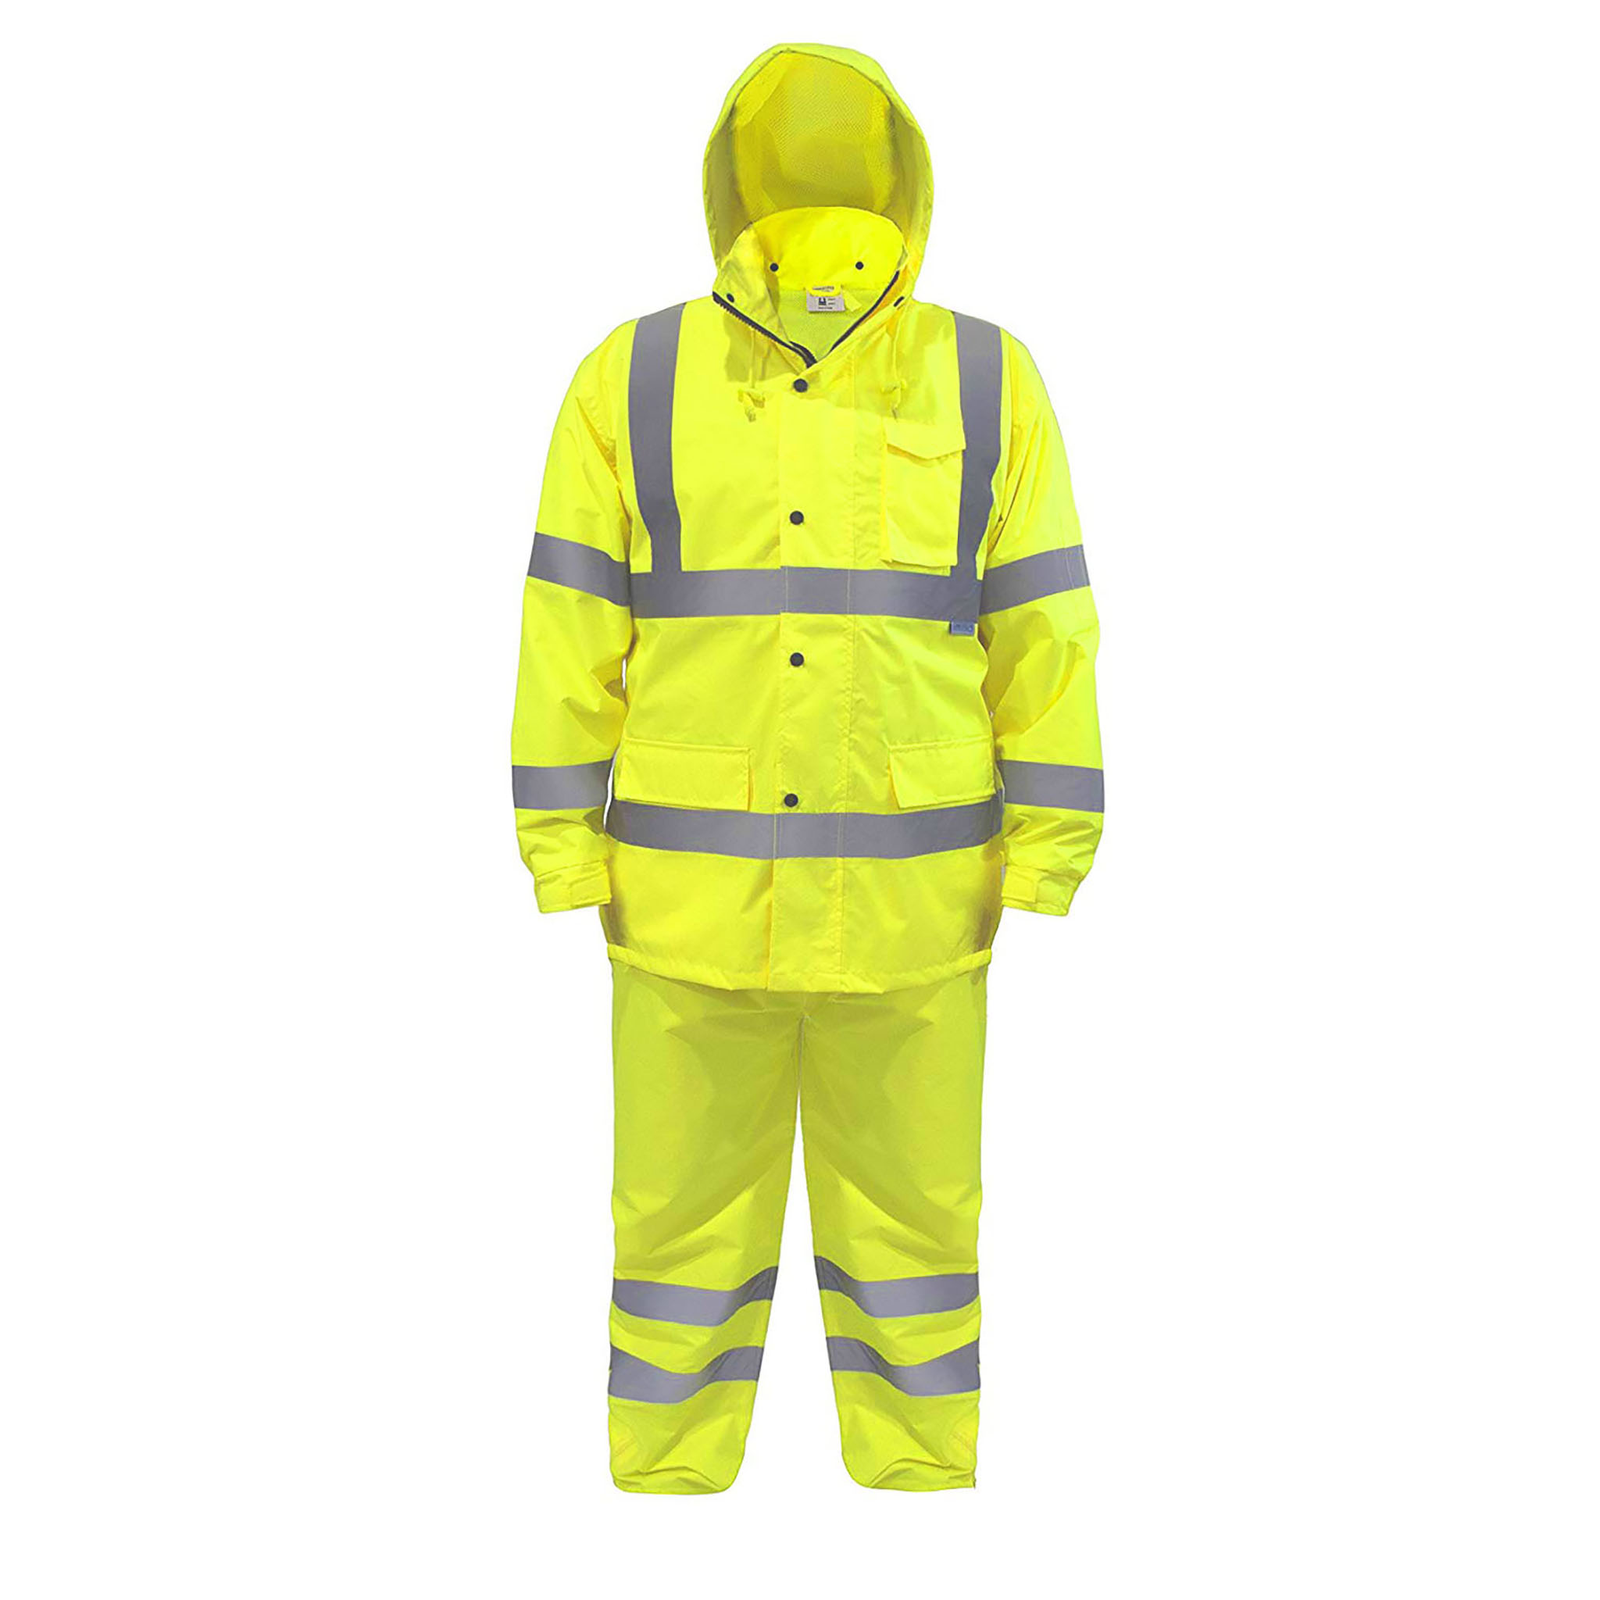 Image of the all yellow high visibility JORESTECH® rain set with 2 inch reflective strips over white background